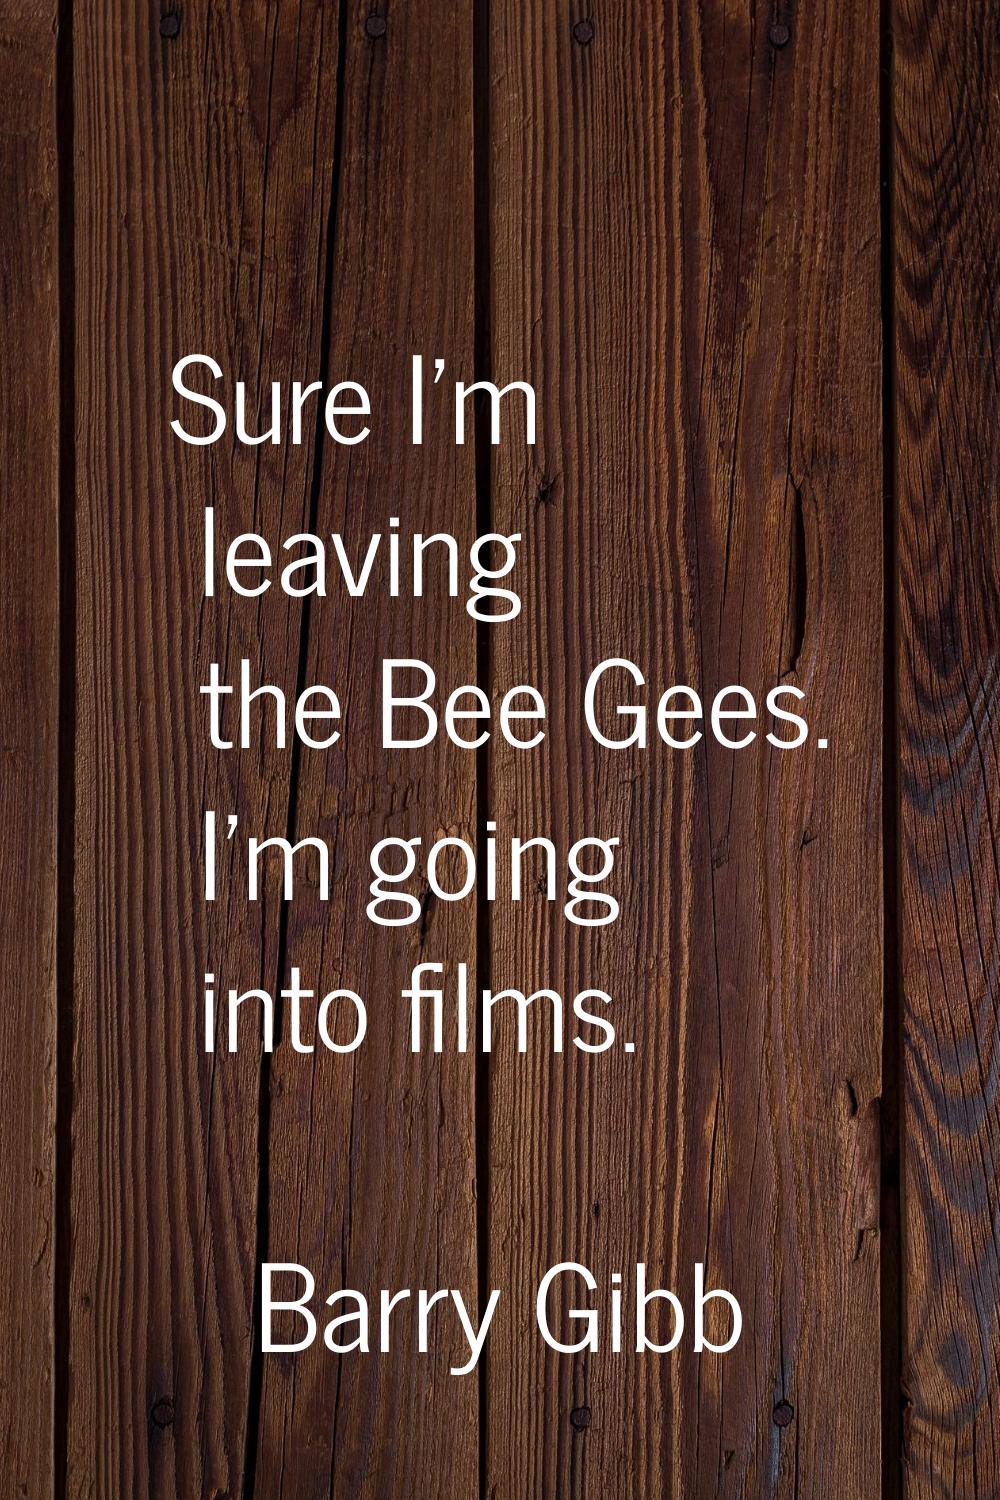 Sure I'm leaving the Bee Gees. I'm going into films.